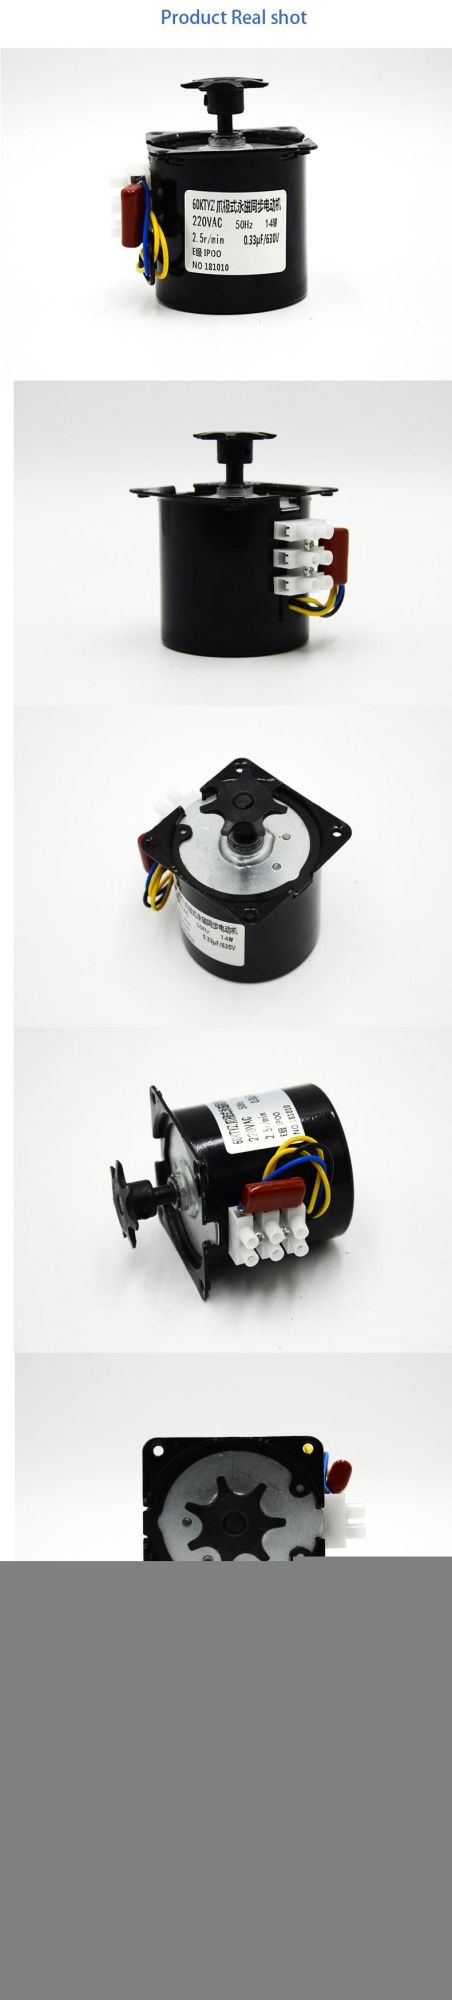 China Industrial Incubator Parts Automatic Egg Turning Egg Incubator Motor 2.5r/Min 14W for Sale